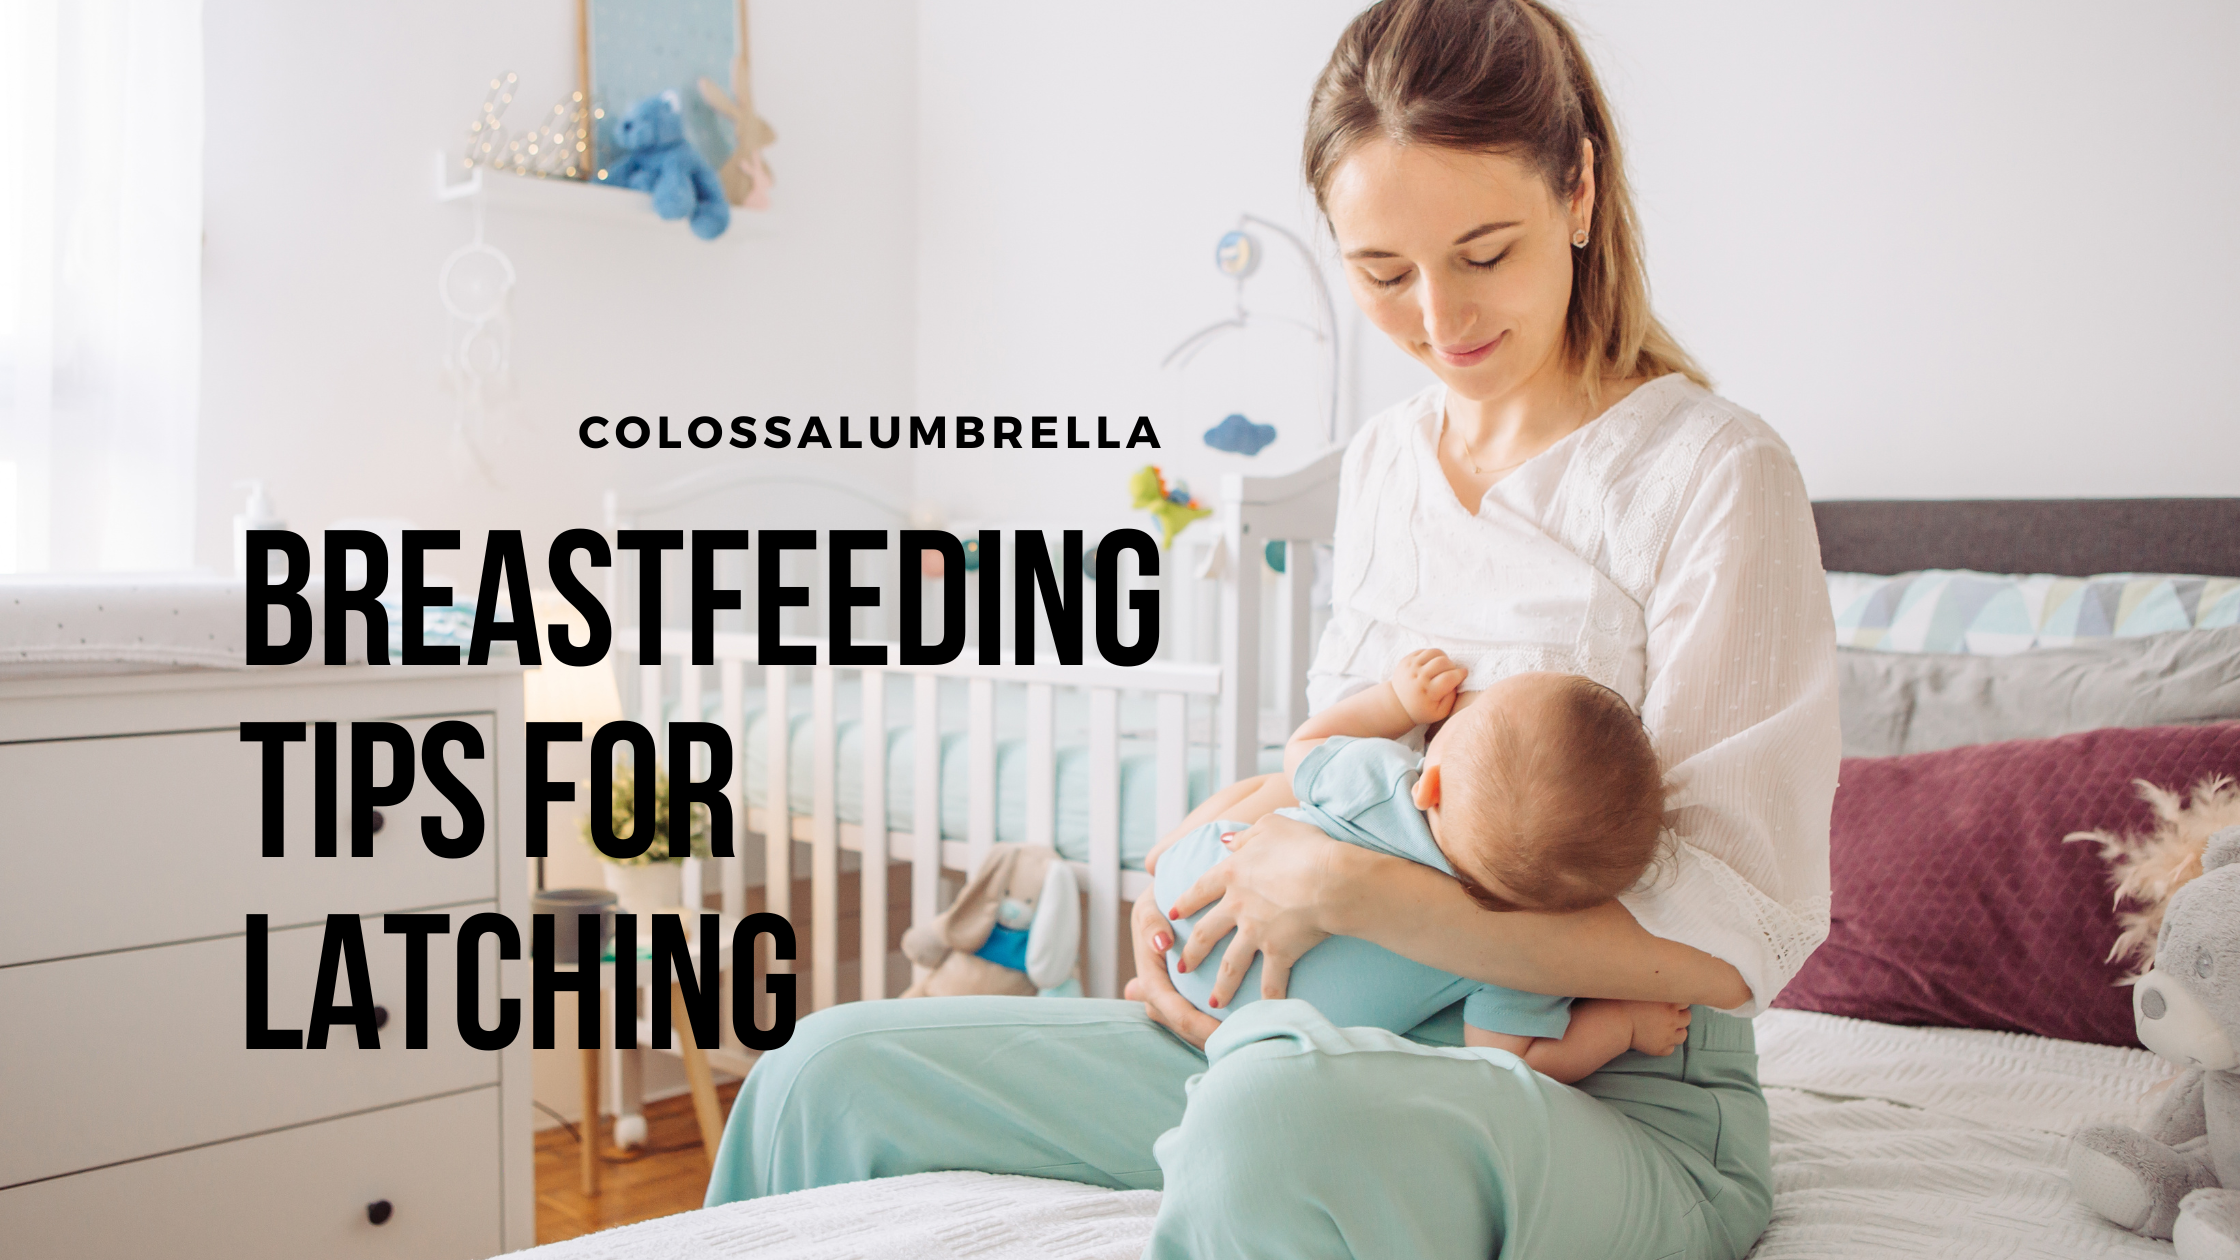 6 Important Breastfeeding tips for latching